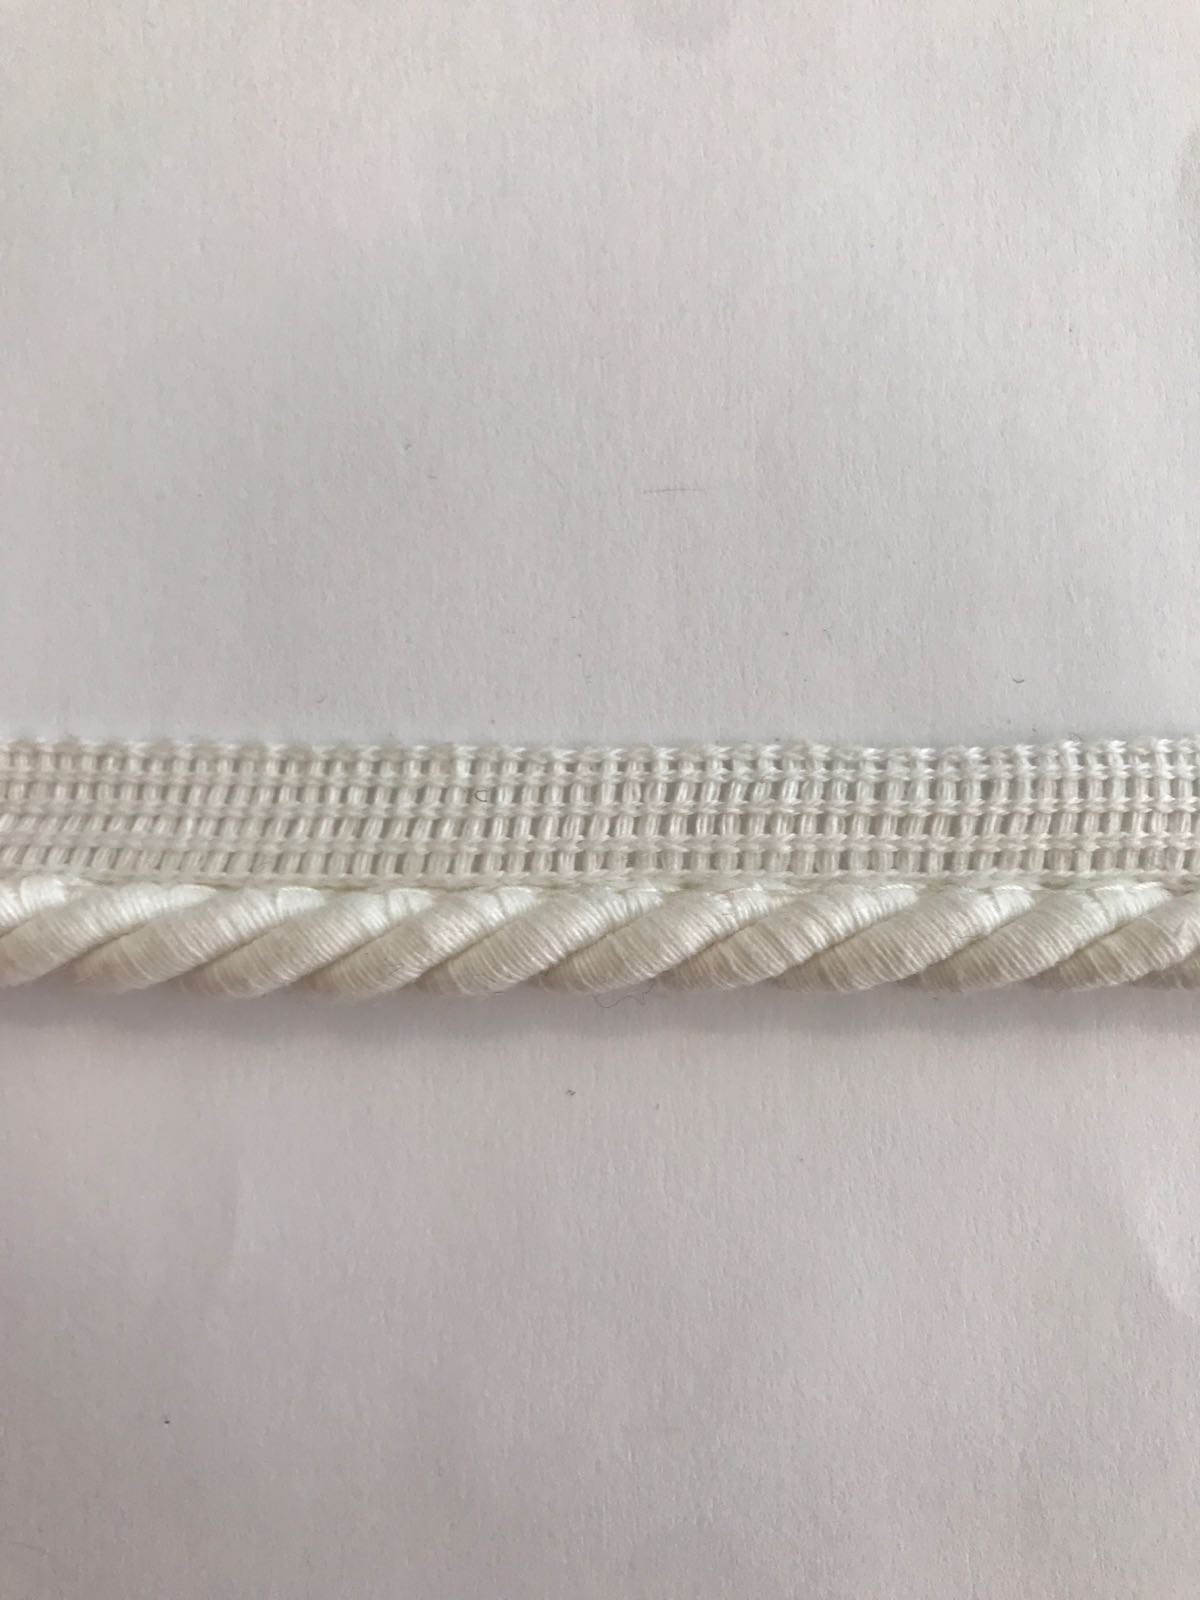 Furniture cord with sewing edge 8 mm